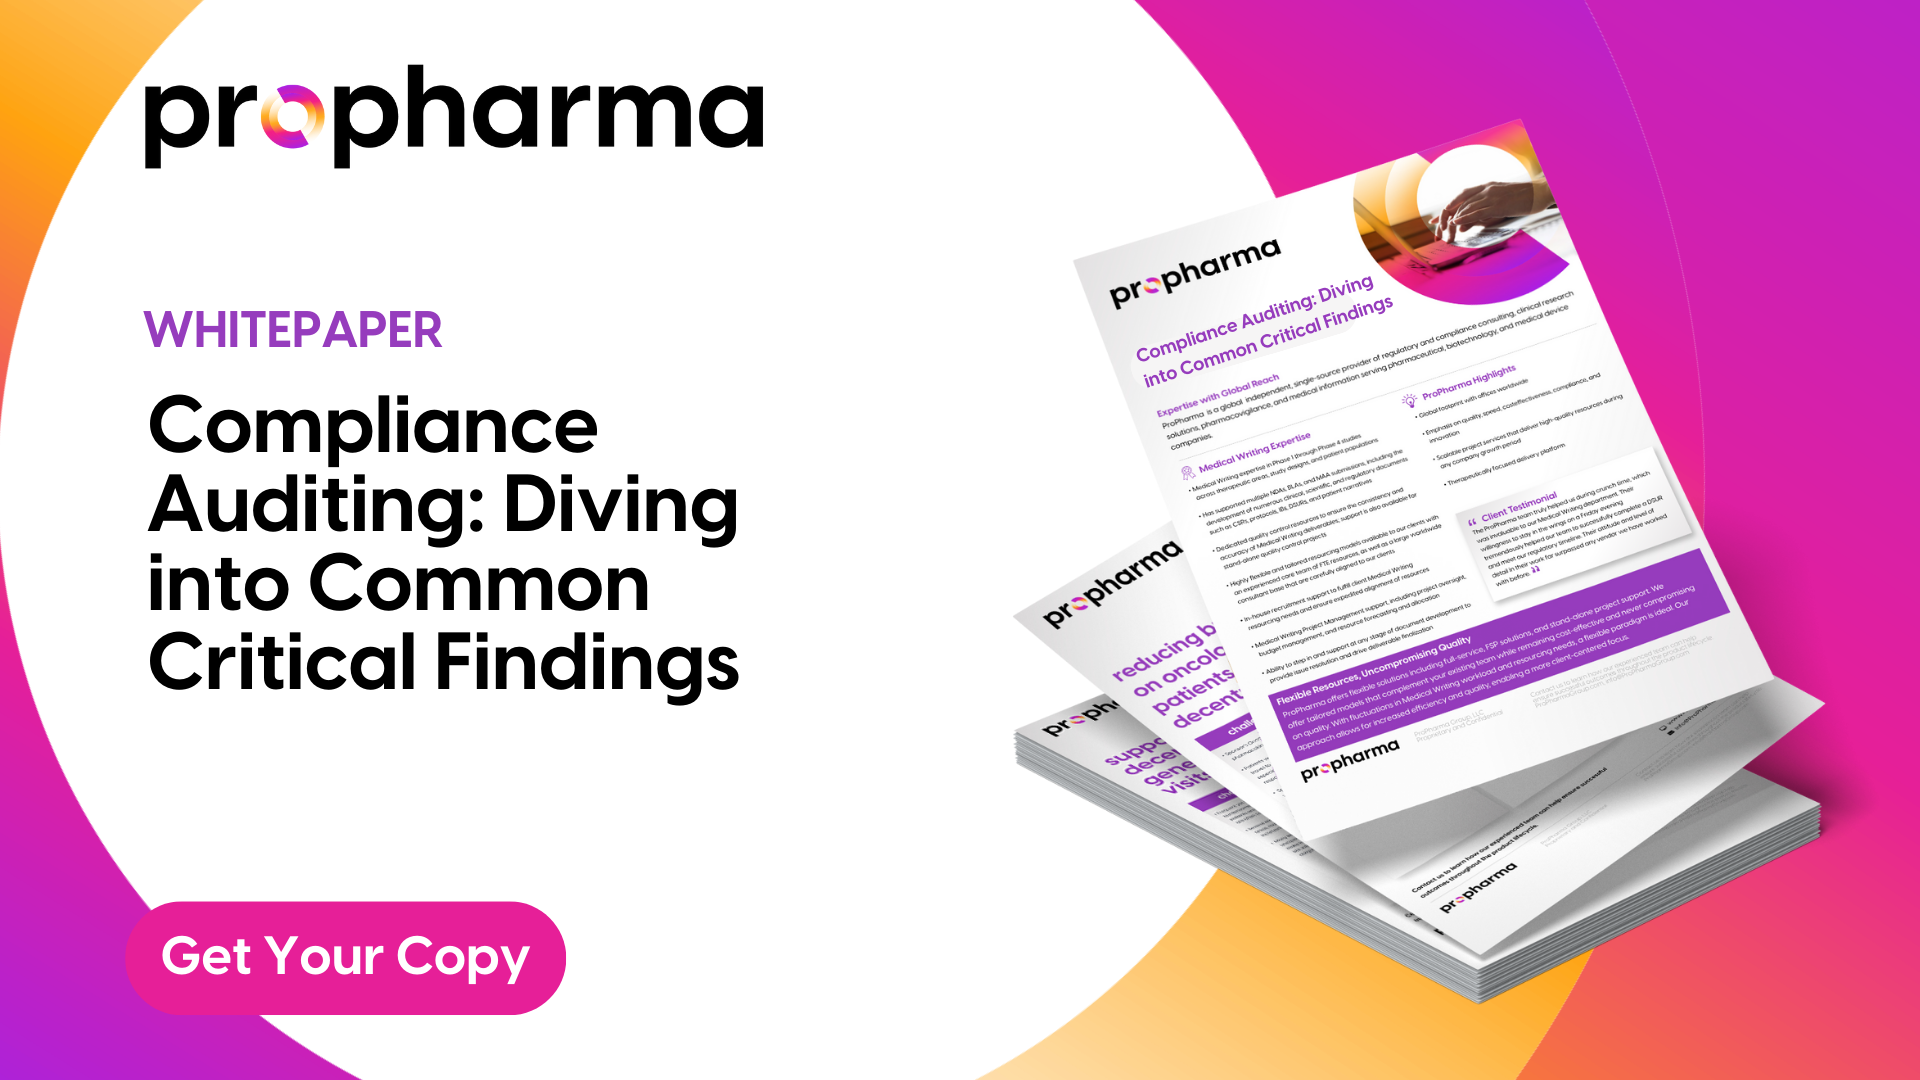 Compliance Auditing: Diving into Common Critical Findings Whitepaper